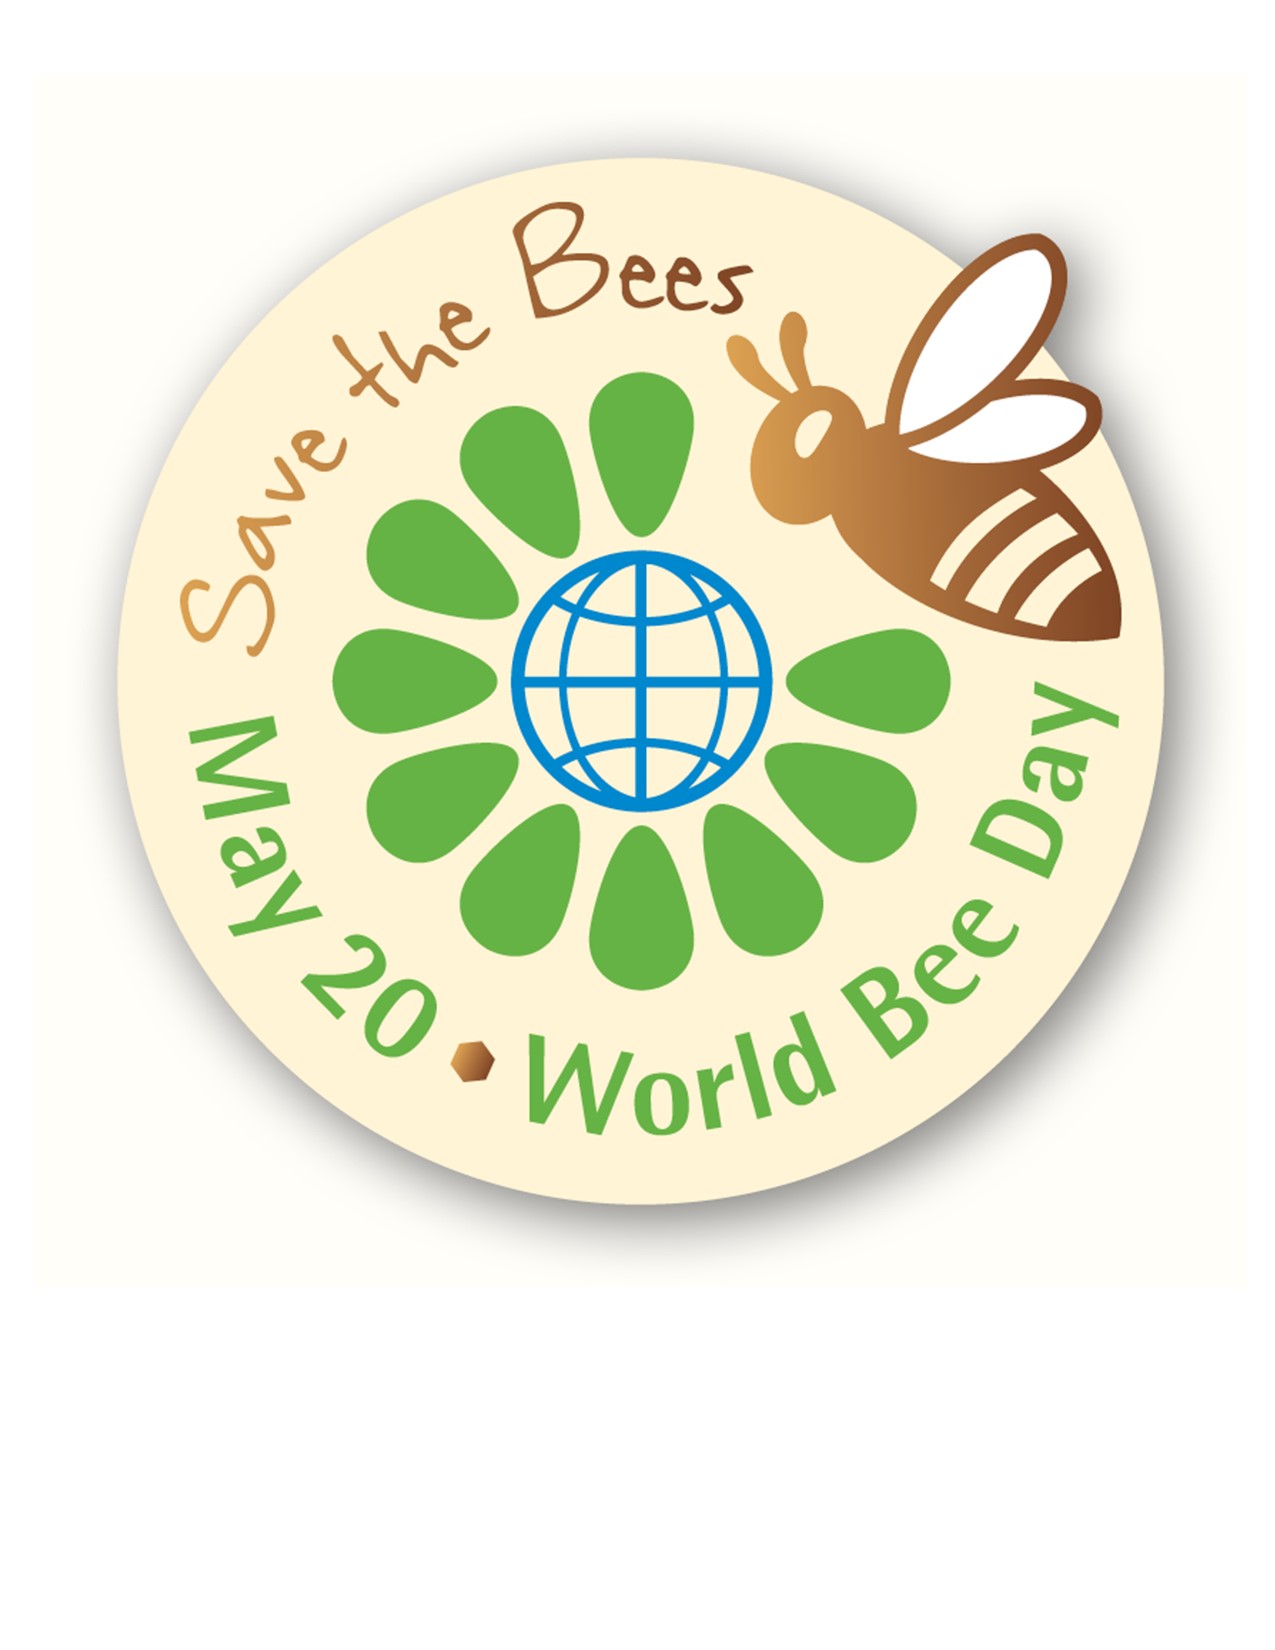 World Bee Day Logo with a graphic of the world as the center of a green flower with a bee hoovering nearby and the text surrounding it in a circle.